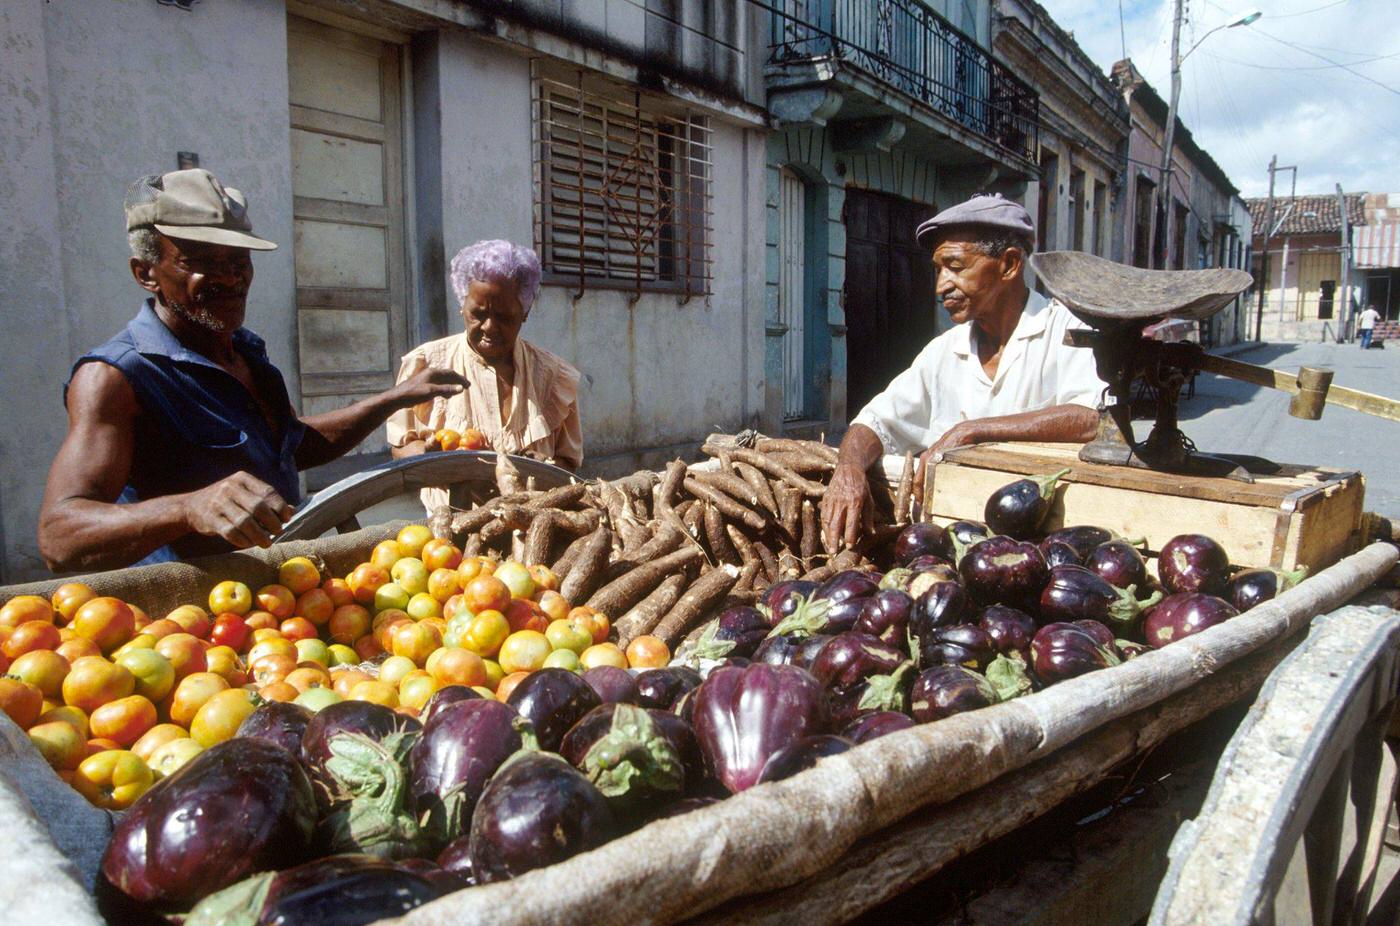 Cuban man selling fruits and vegetables displayed on a cart, Cuba, 1990.